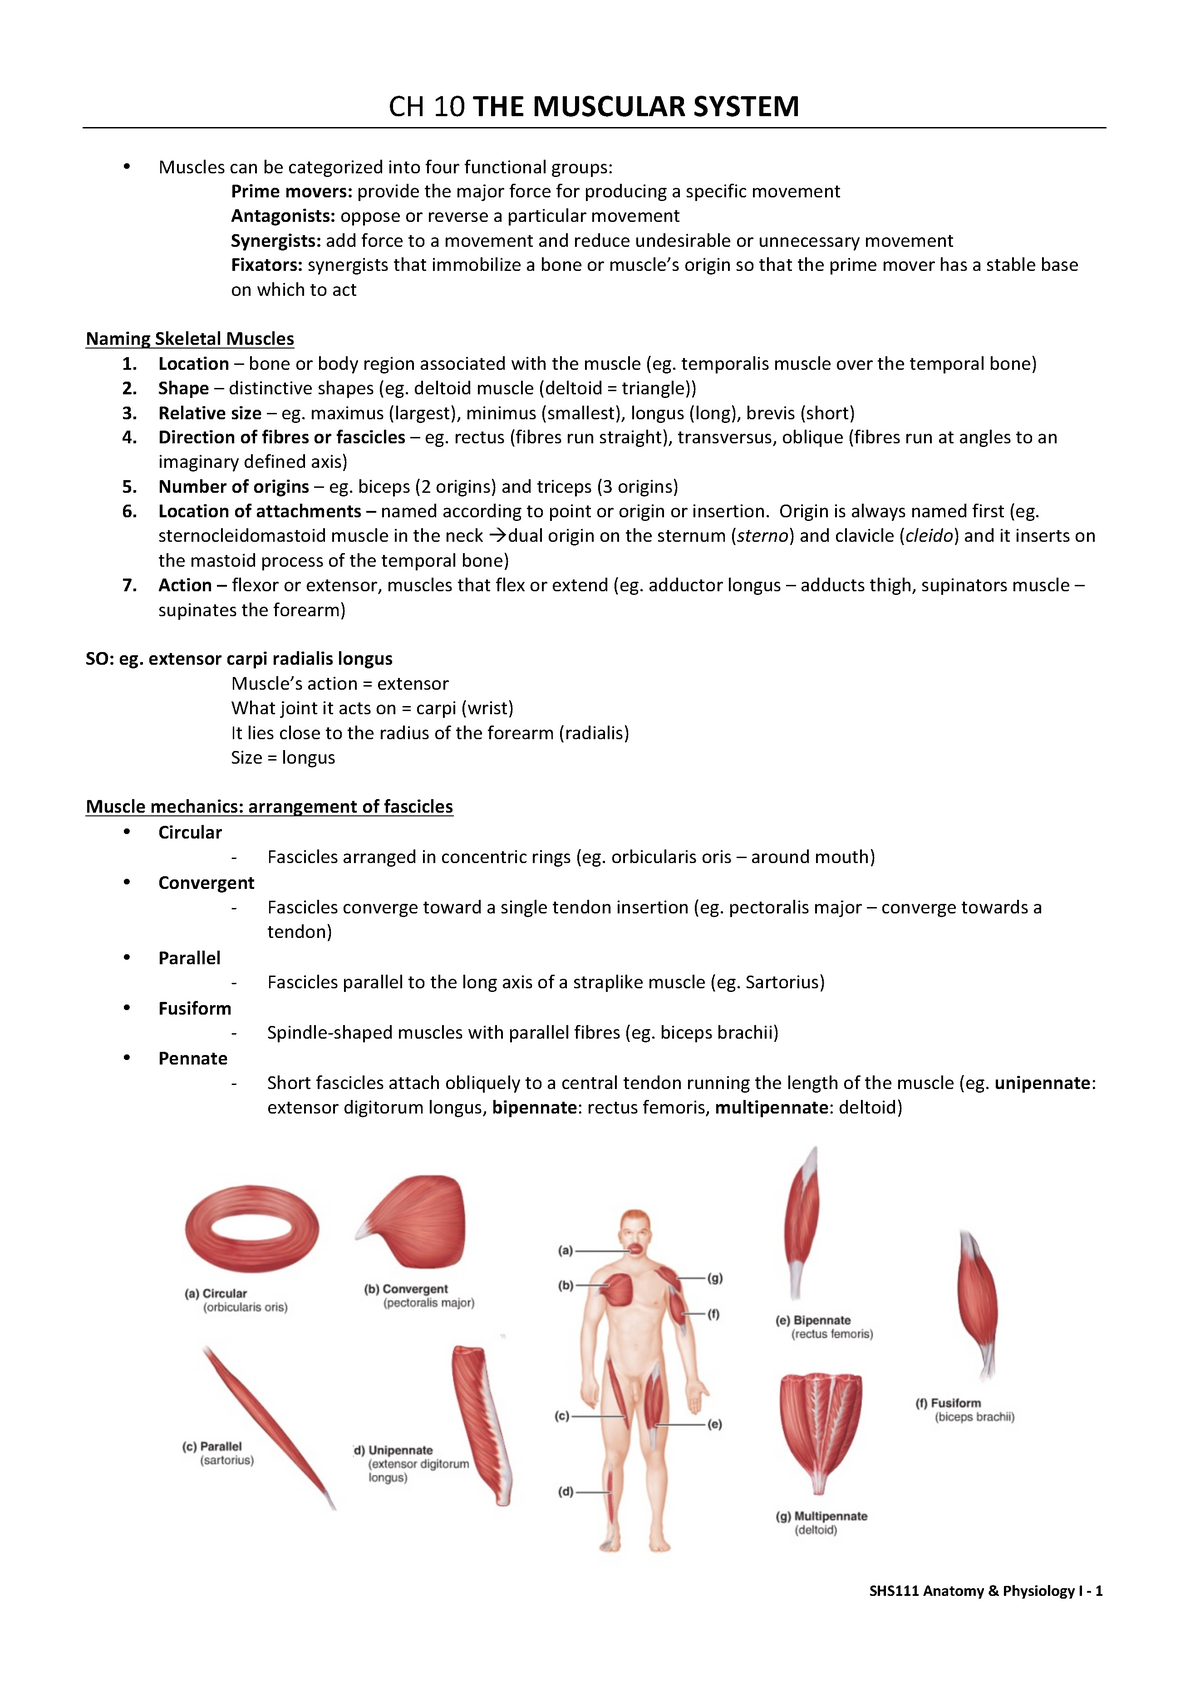 Summary - The Muscular System (Ch10) - SHS111 - UOW - StuDocu